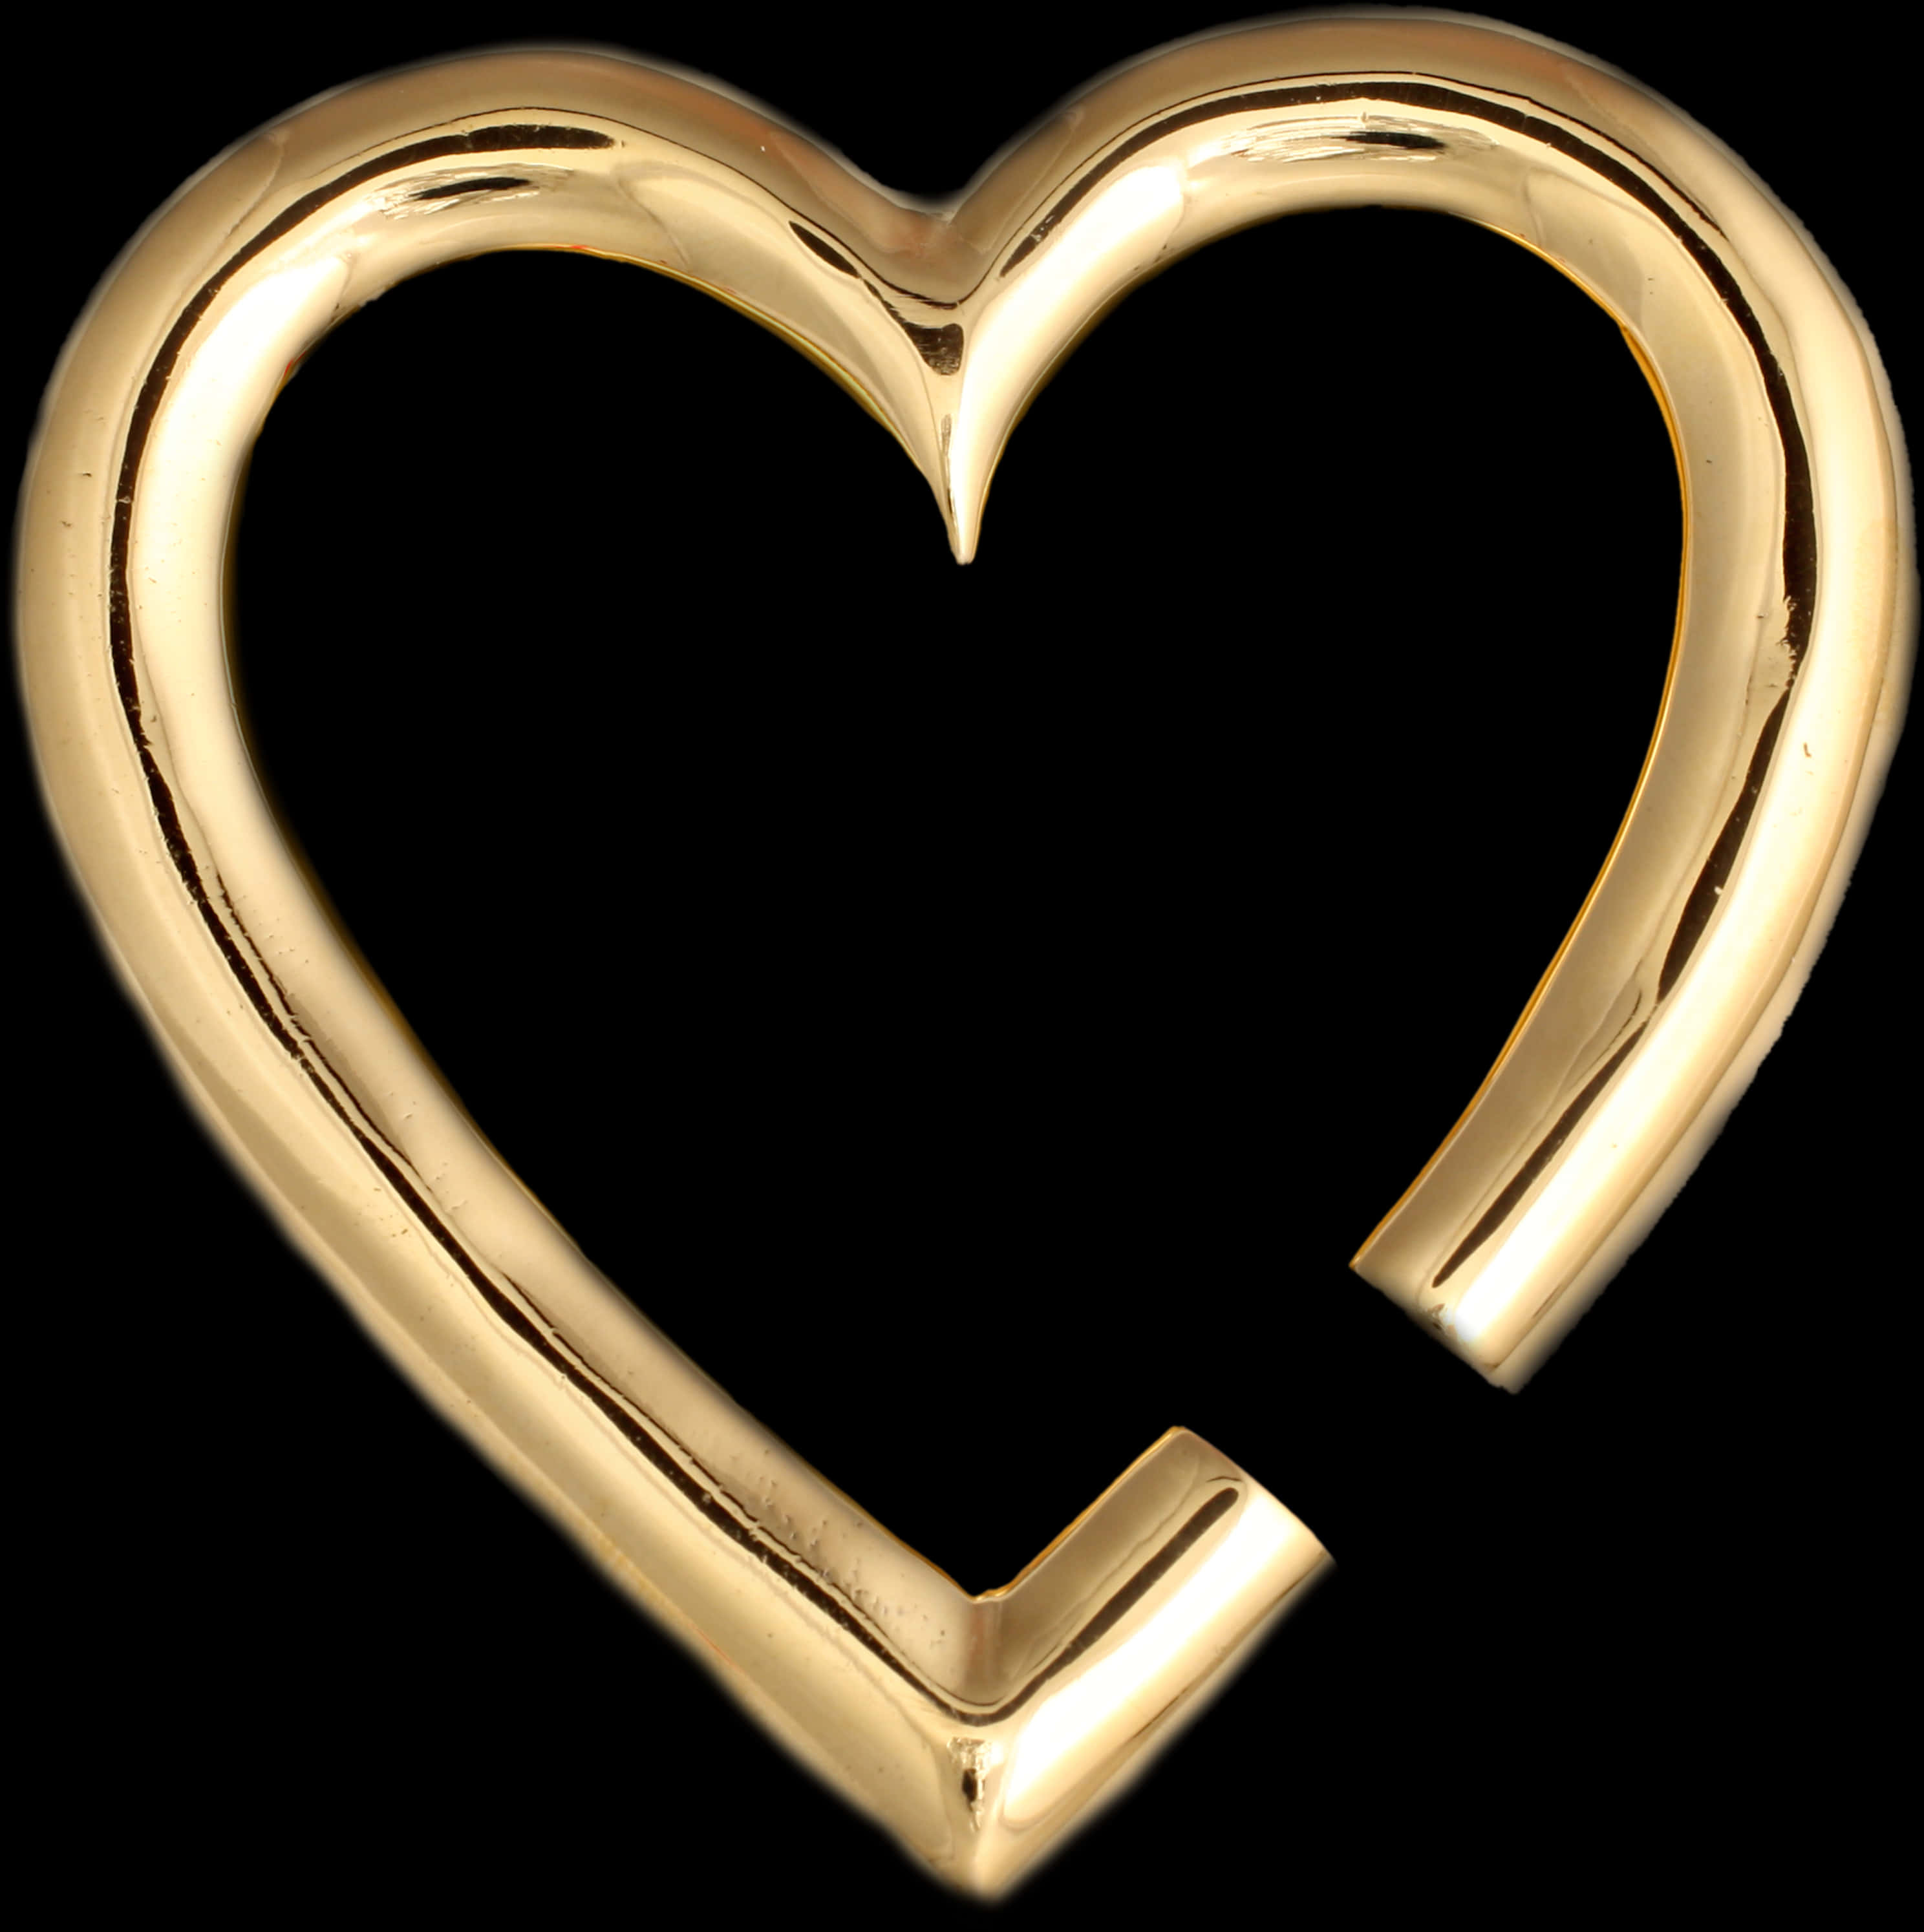 A Gold Heart Shaped Object PNG